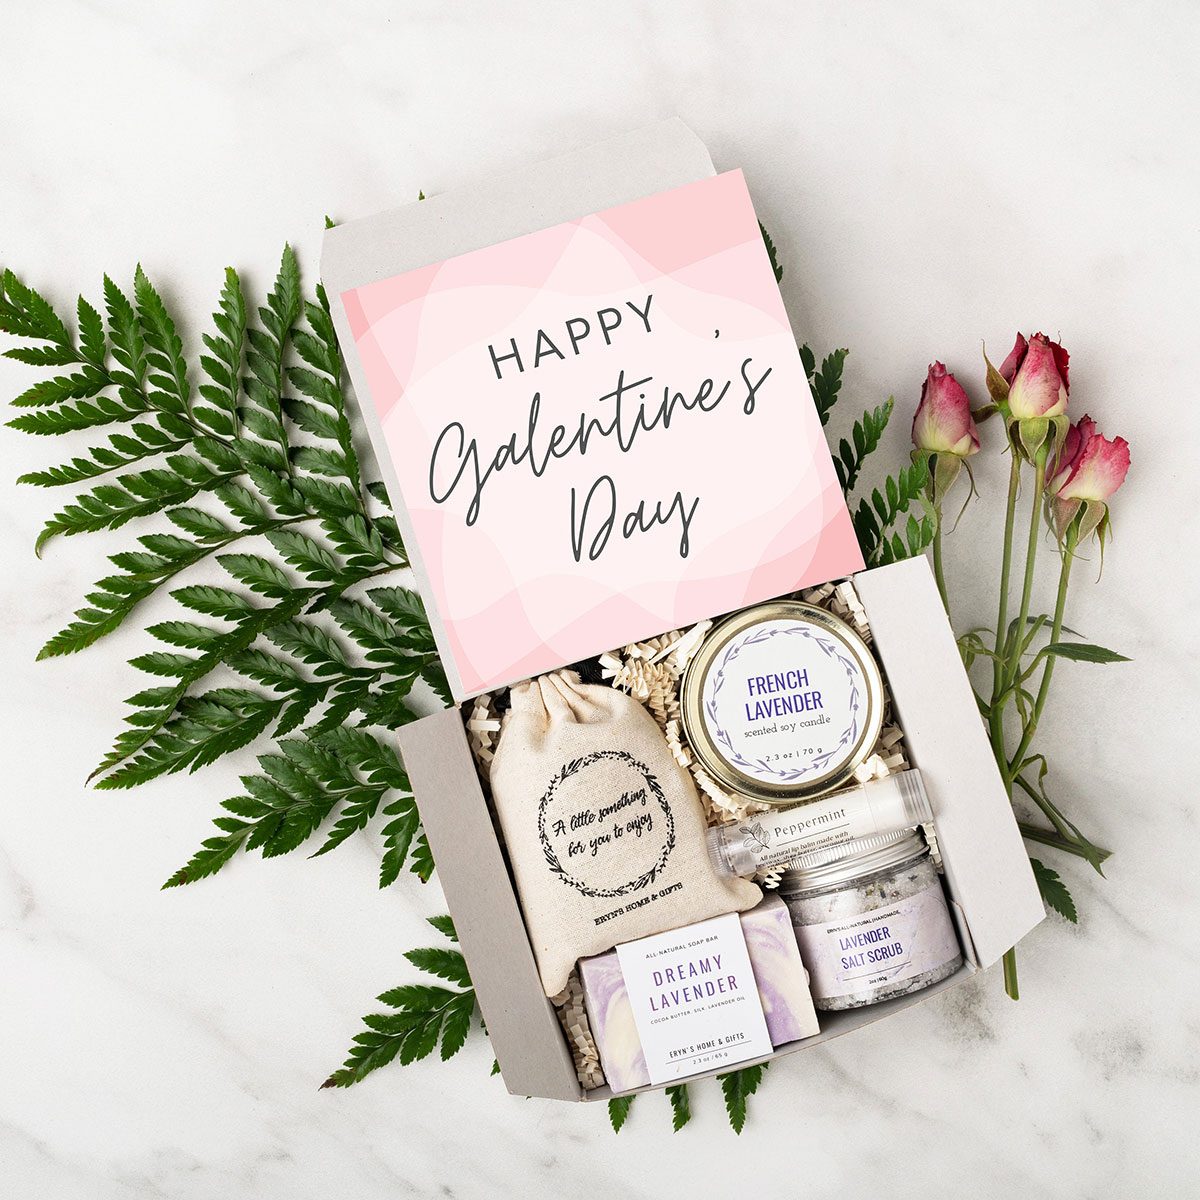 Galentine's Day Gifts Under $30 - Boston Chic Party